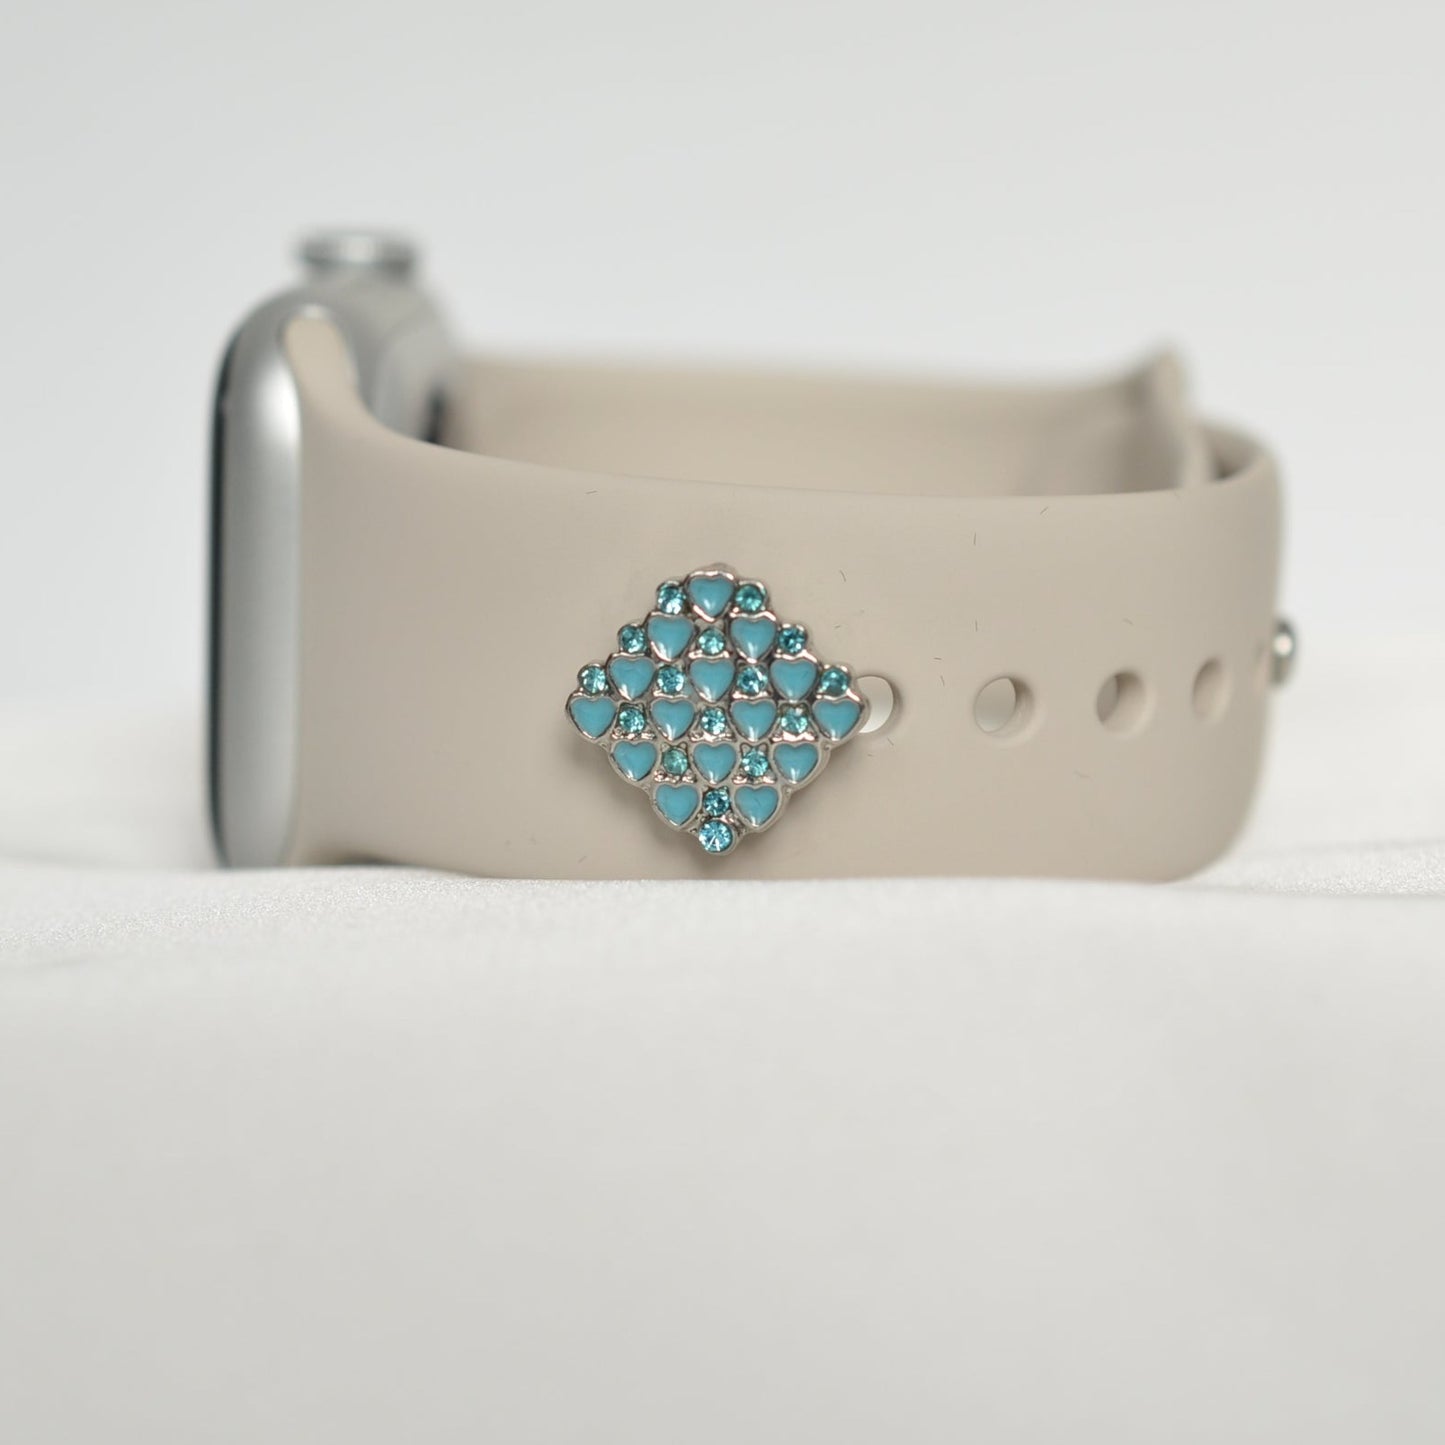 Square Blue Heart Charm for Belt, Bag and Watch Bands